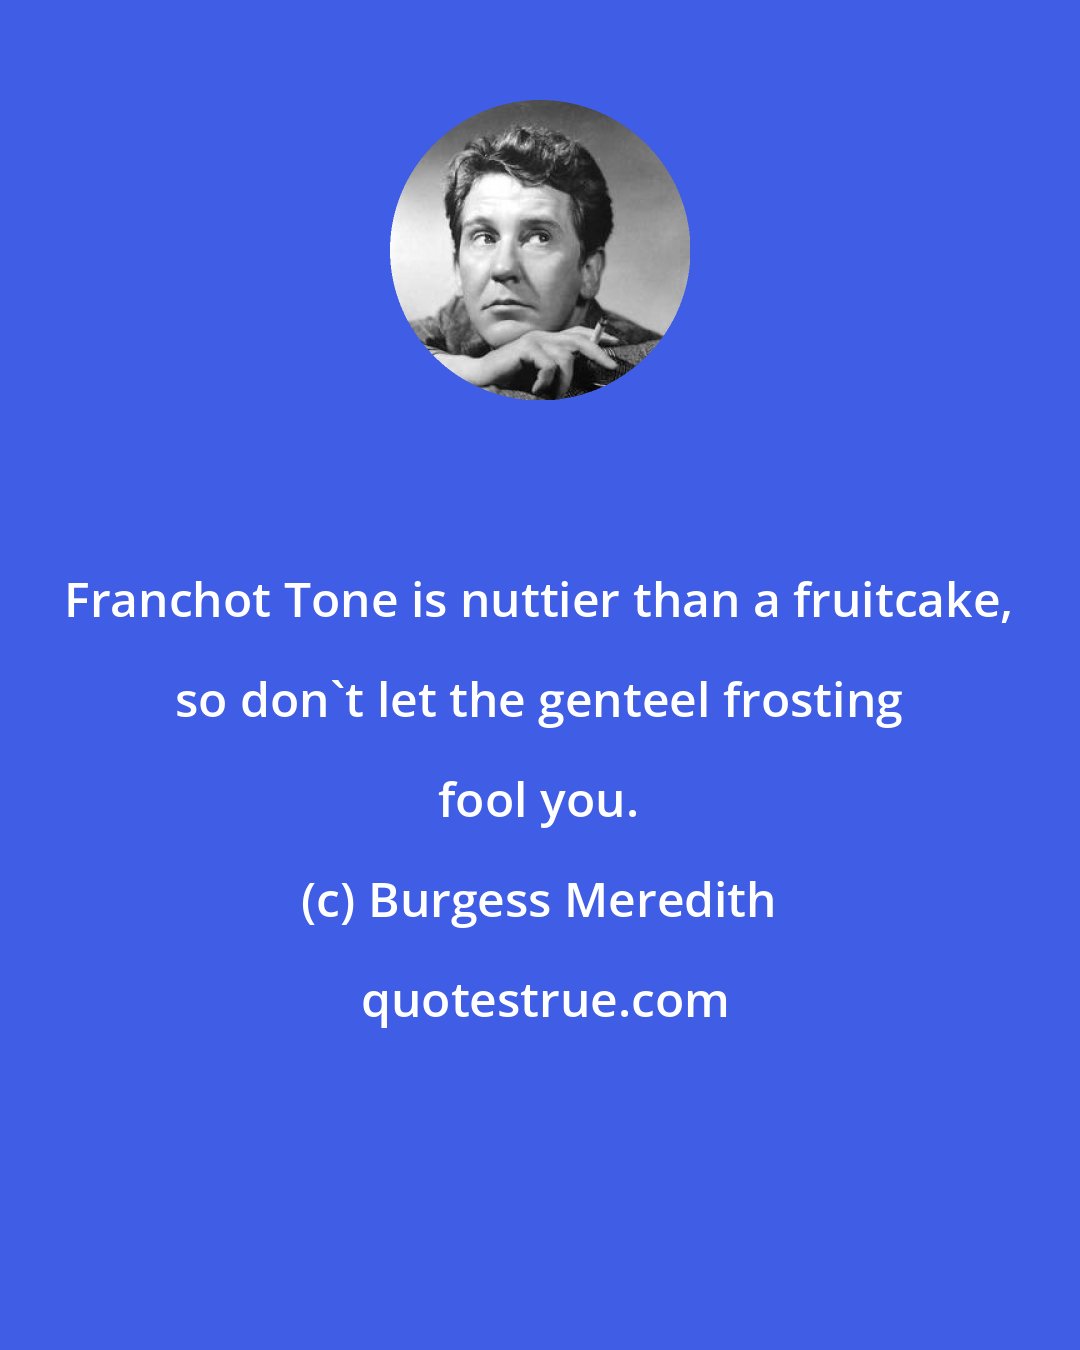 Burgess Meredith: Franchot Tone is nuttier than a fruitcake, so don't let the genteel frosting fool you.